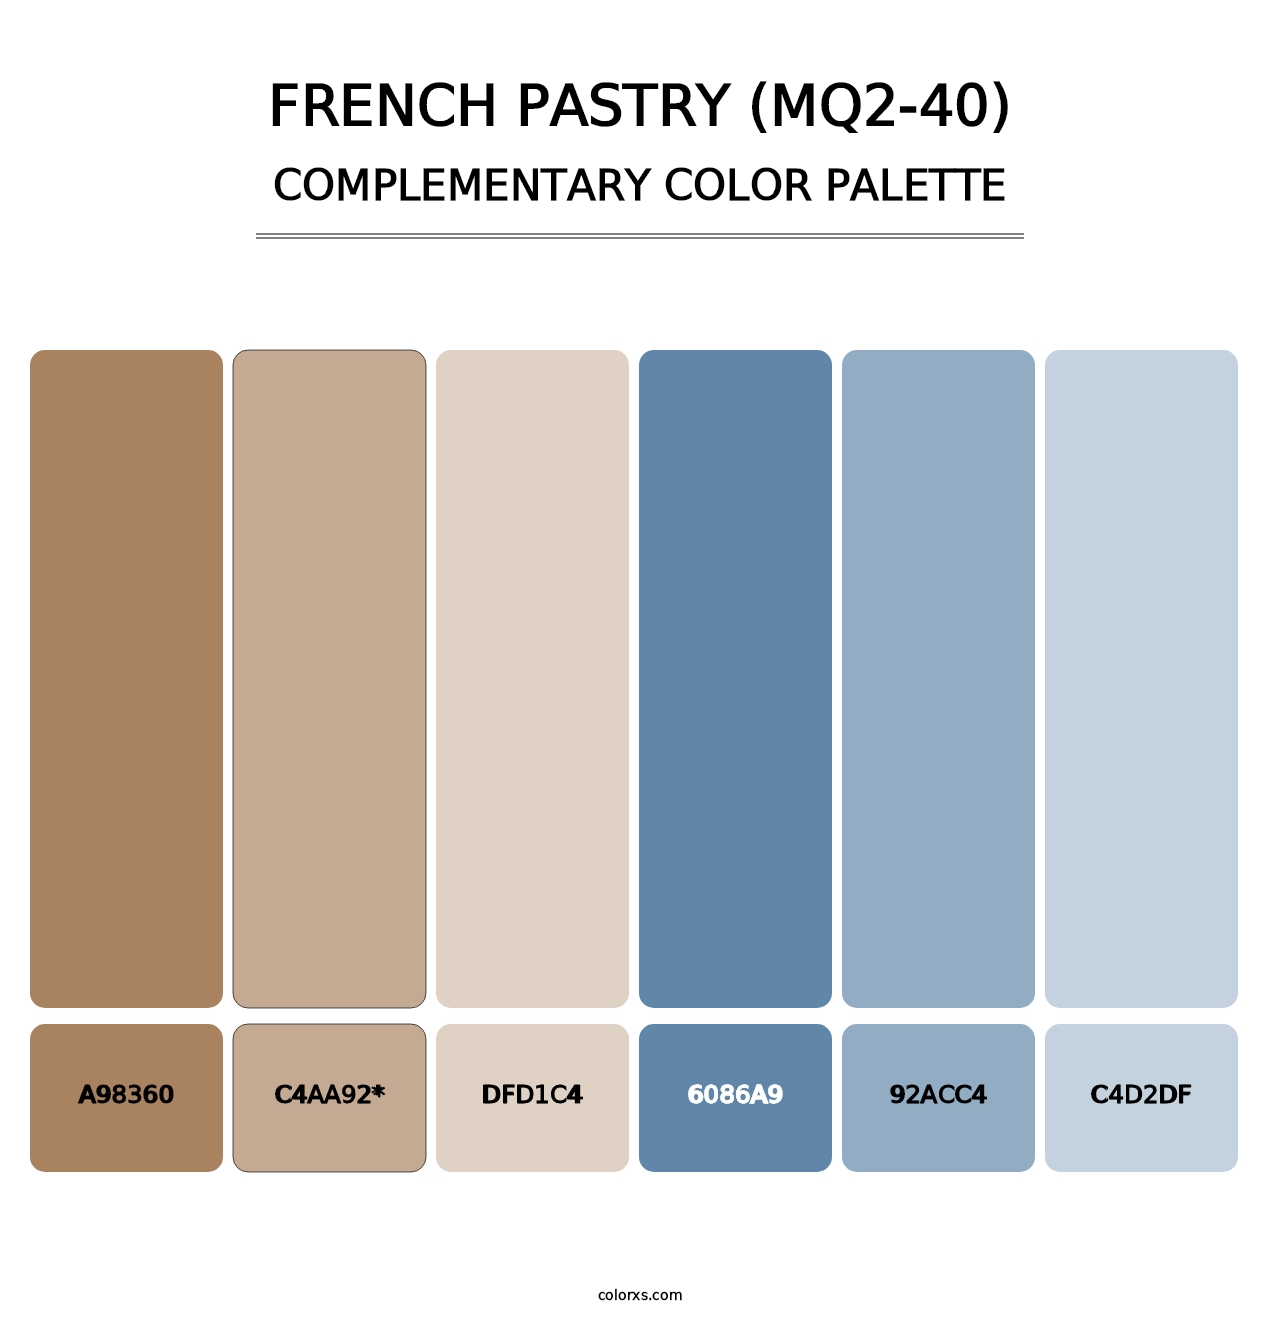 French Pastry (MQ2-40) - Complementary Color Palette